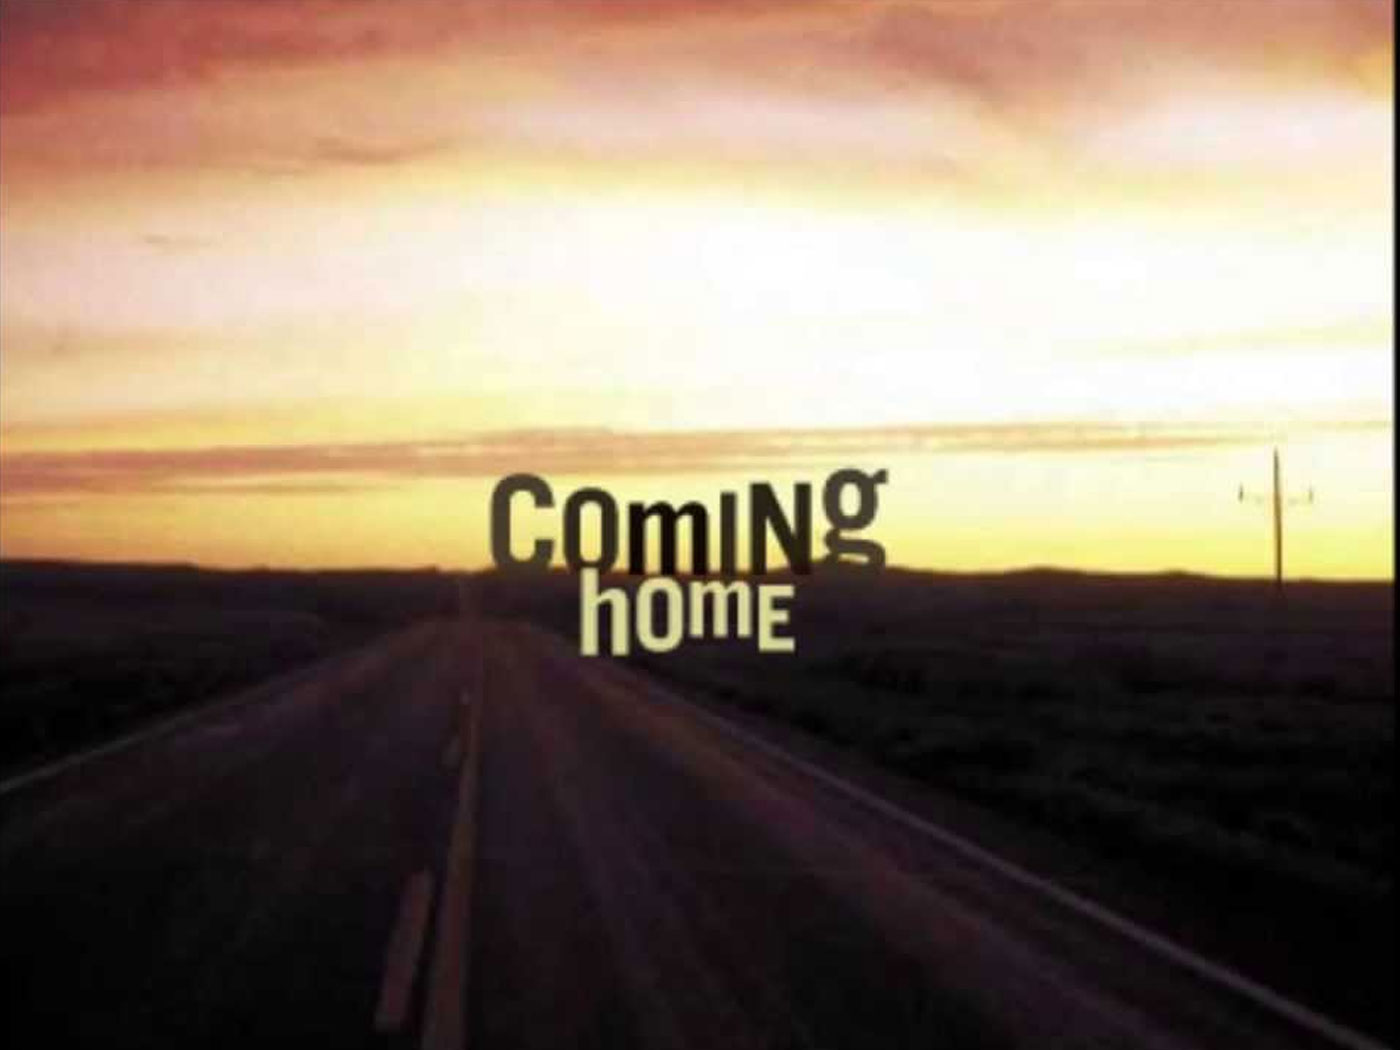 "I'm Coming Home" Mount Bethel Ministries